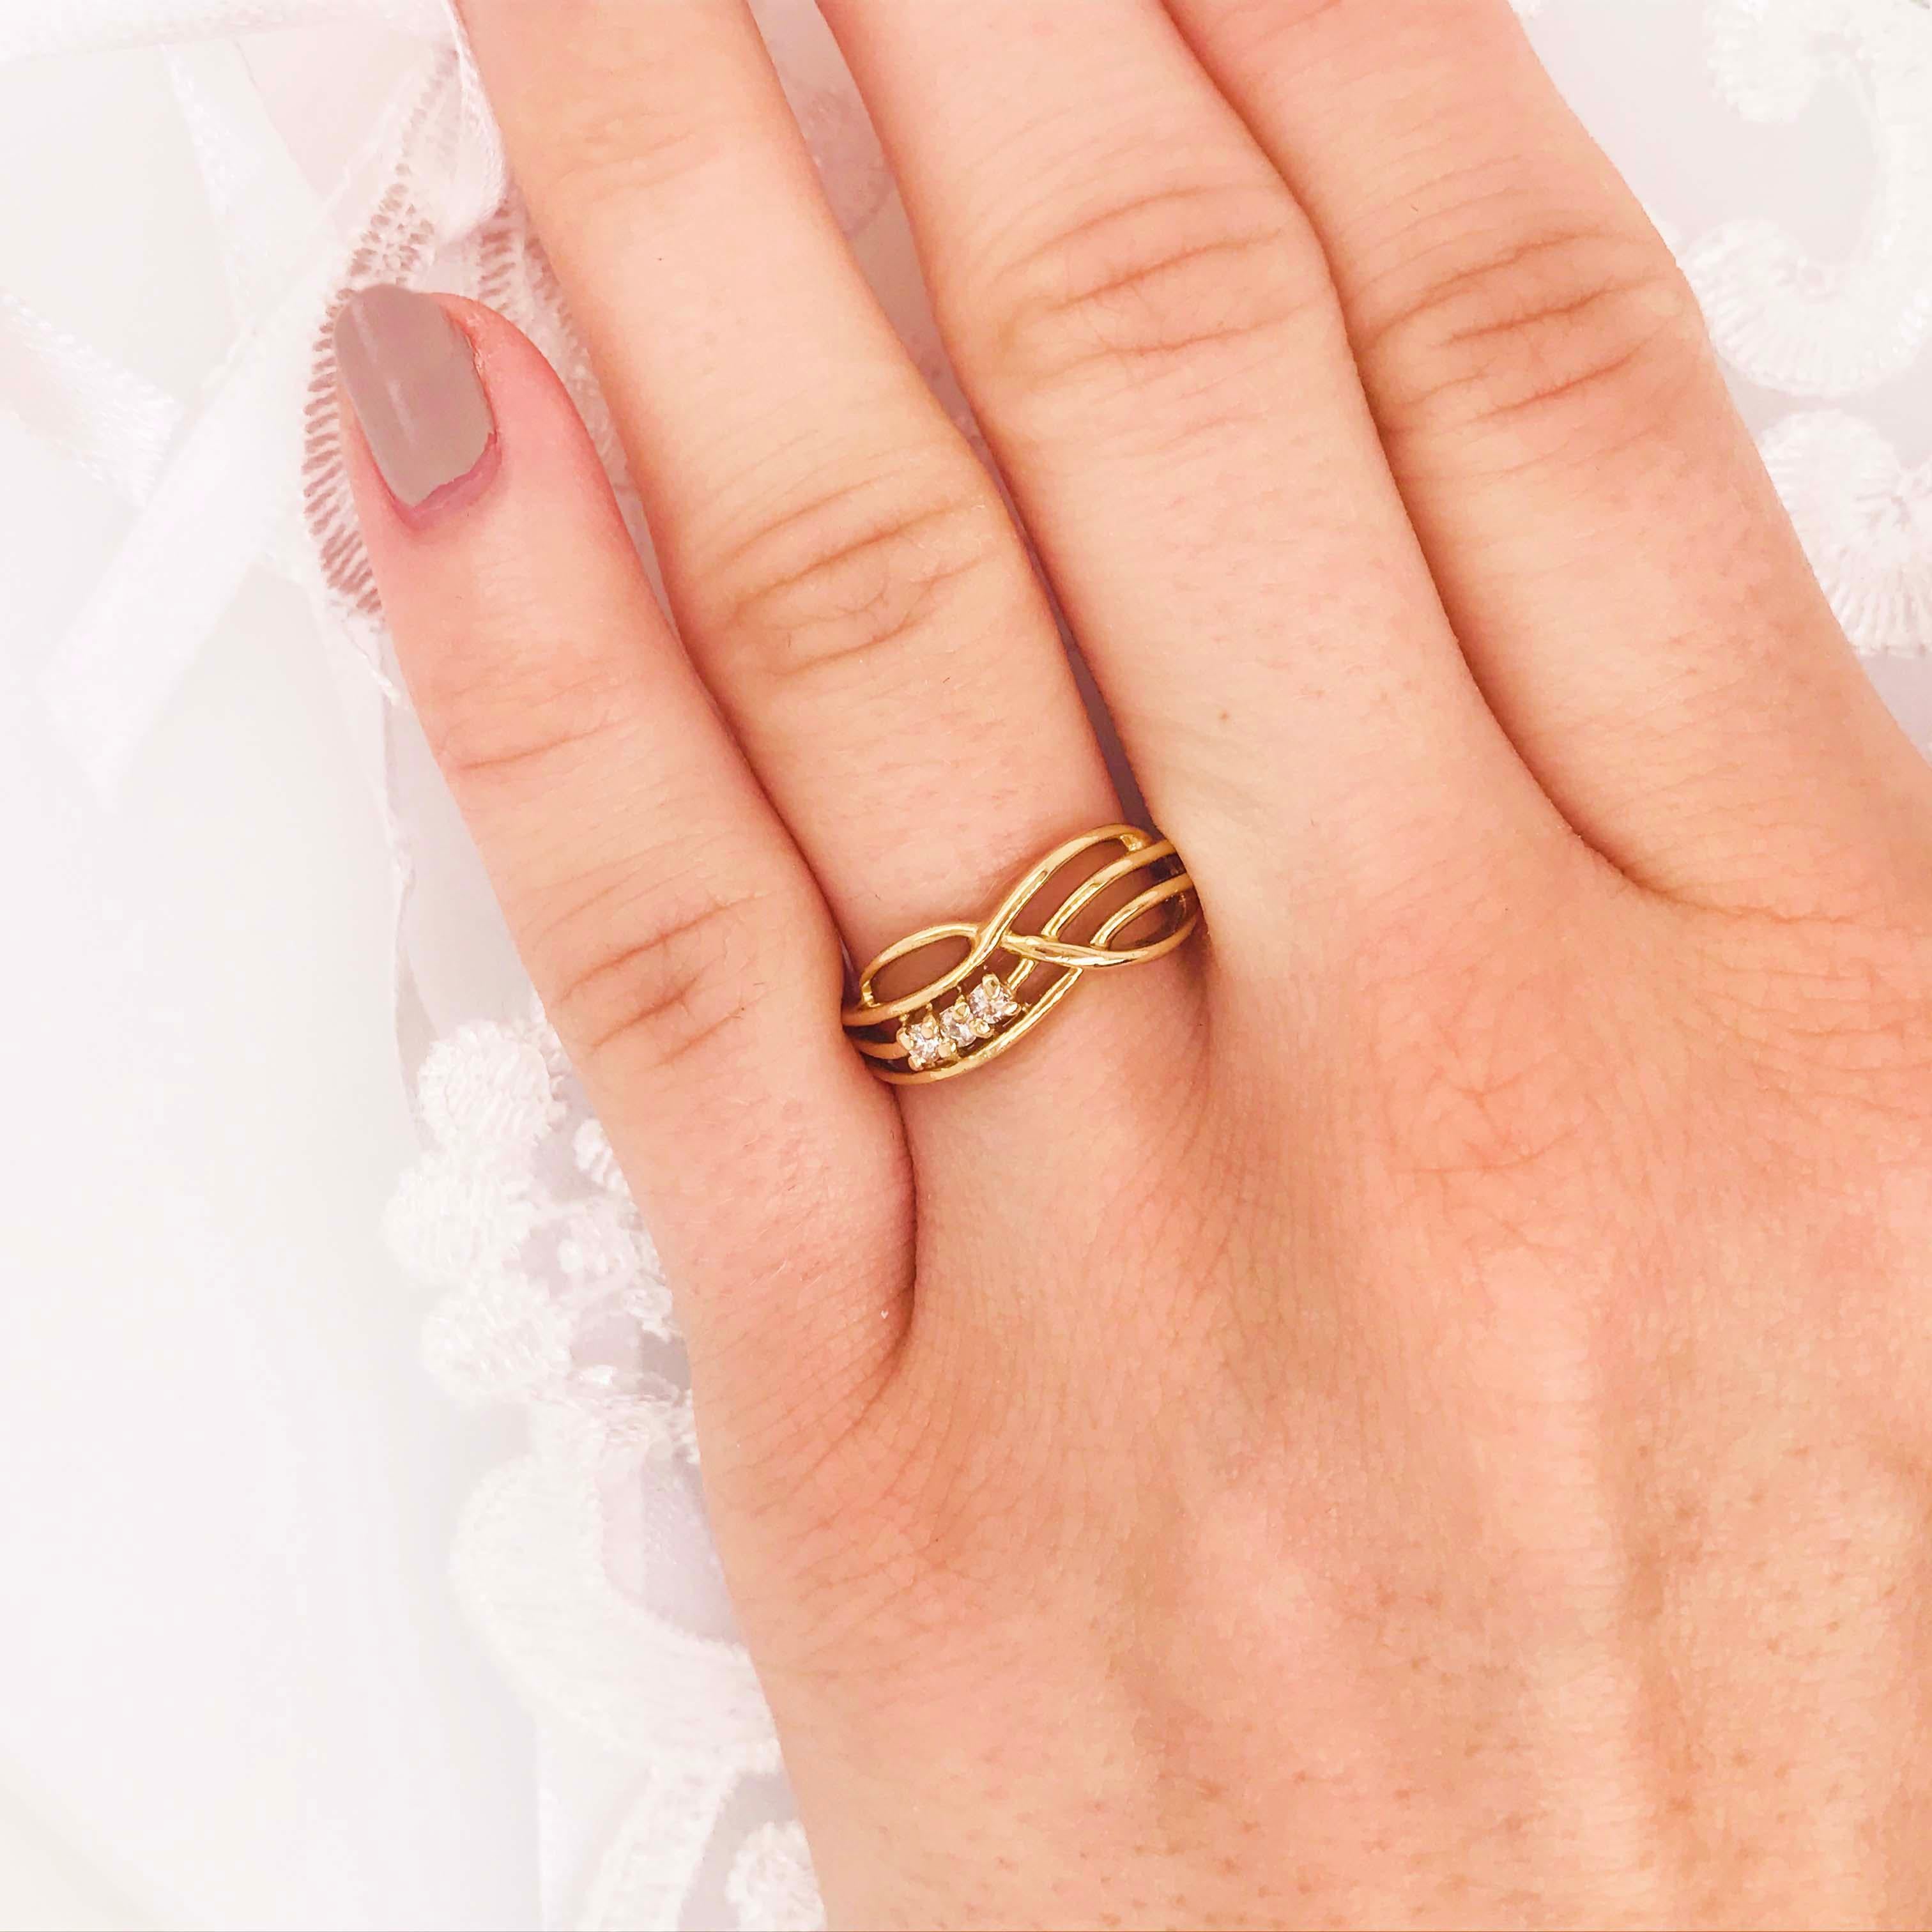 Who doesn't want eternal love? You deserve to always feel loved! This beautiful diamond band is designed with an infinity shape made on yellow gold and diamonds! The whimsical design has the shape of an infinity design, representing eternal love.